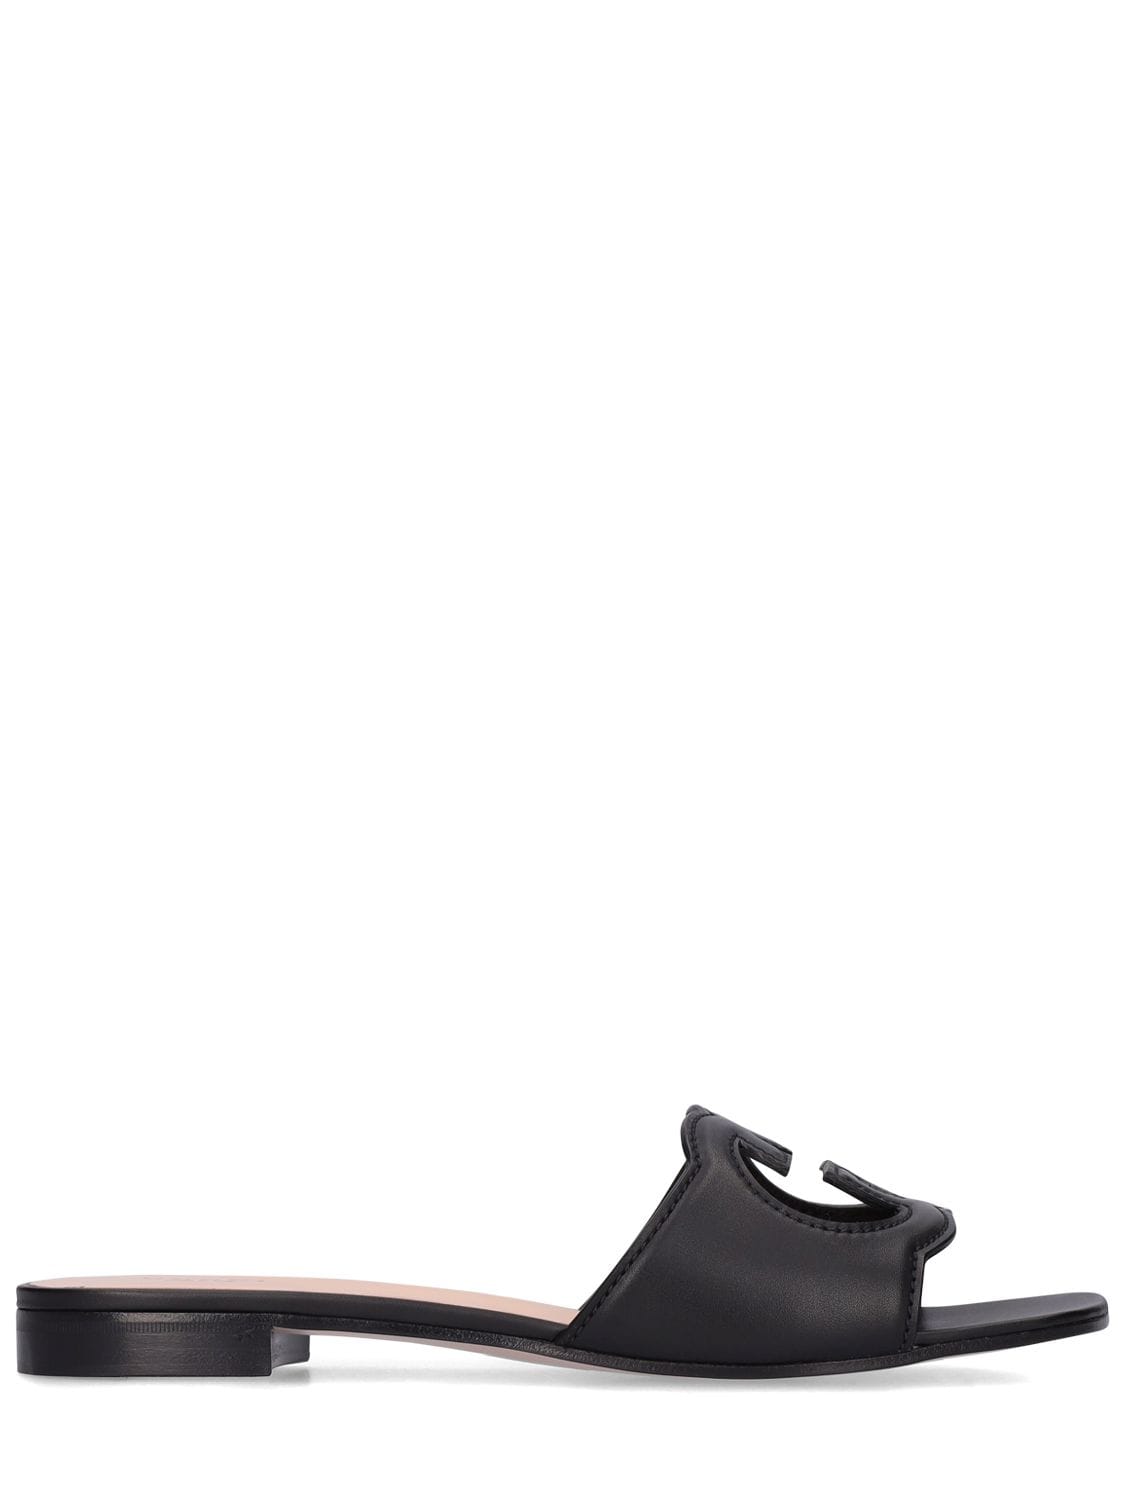 GUCCI 20MM GG CUTOUT LEATHER SLIDE SANDALS